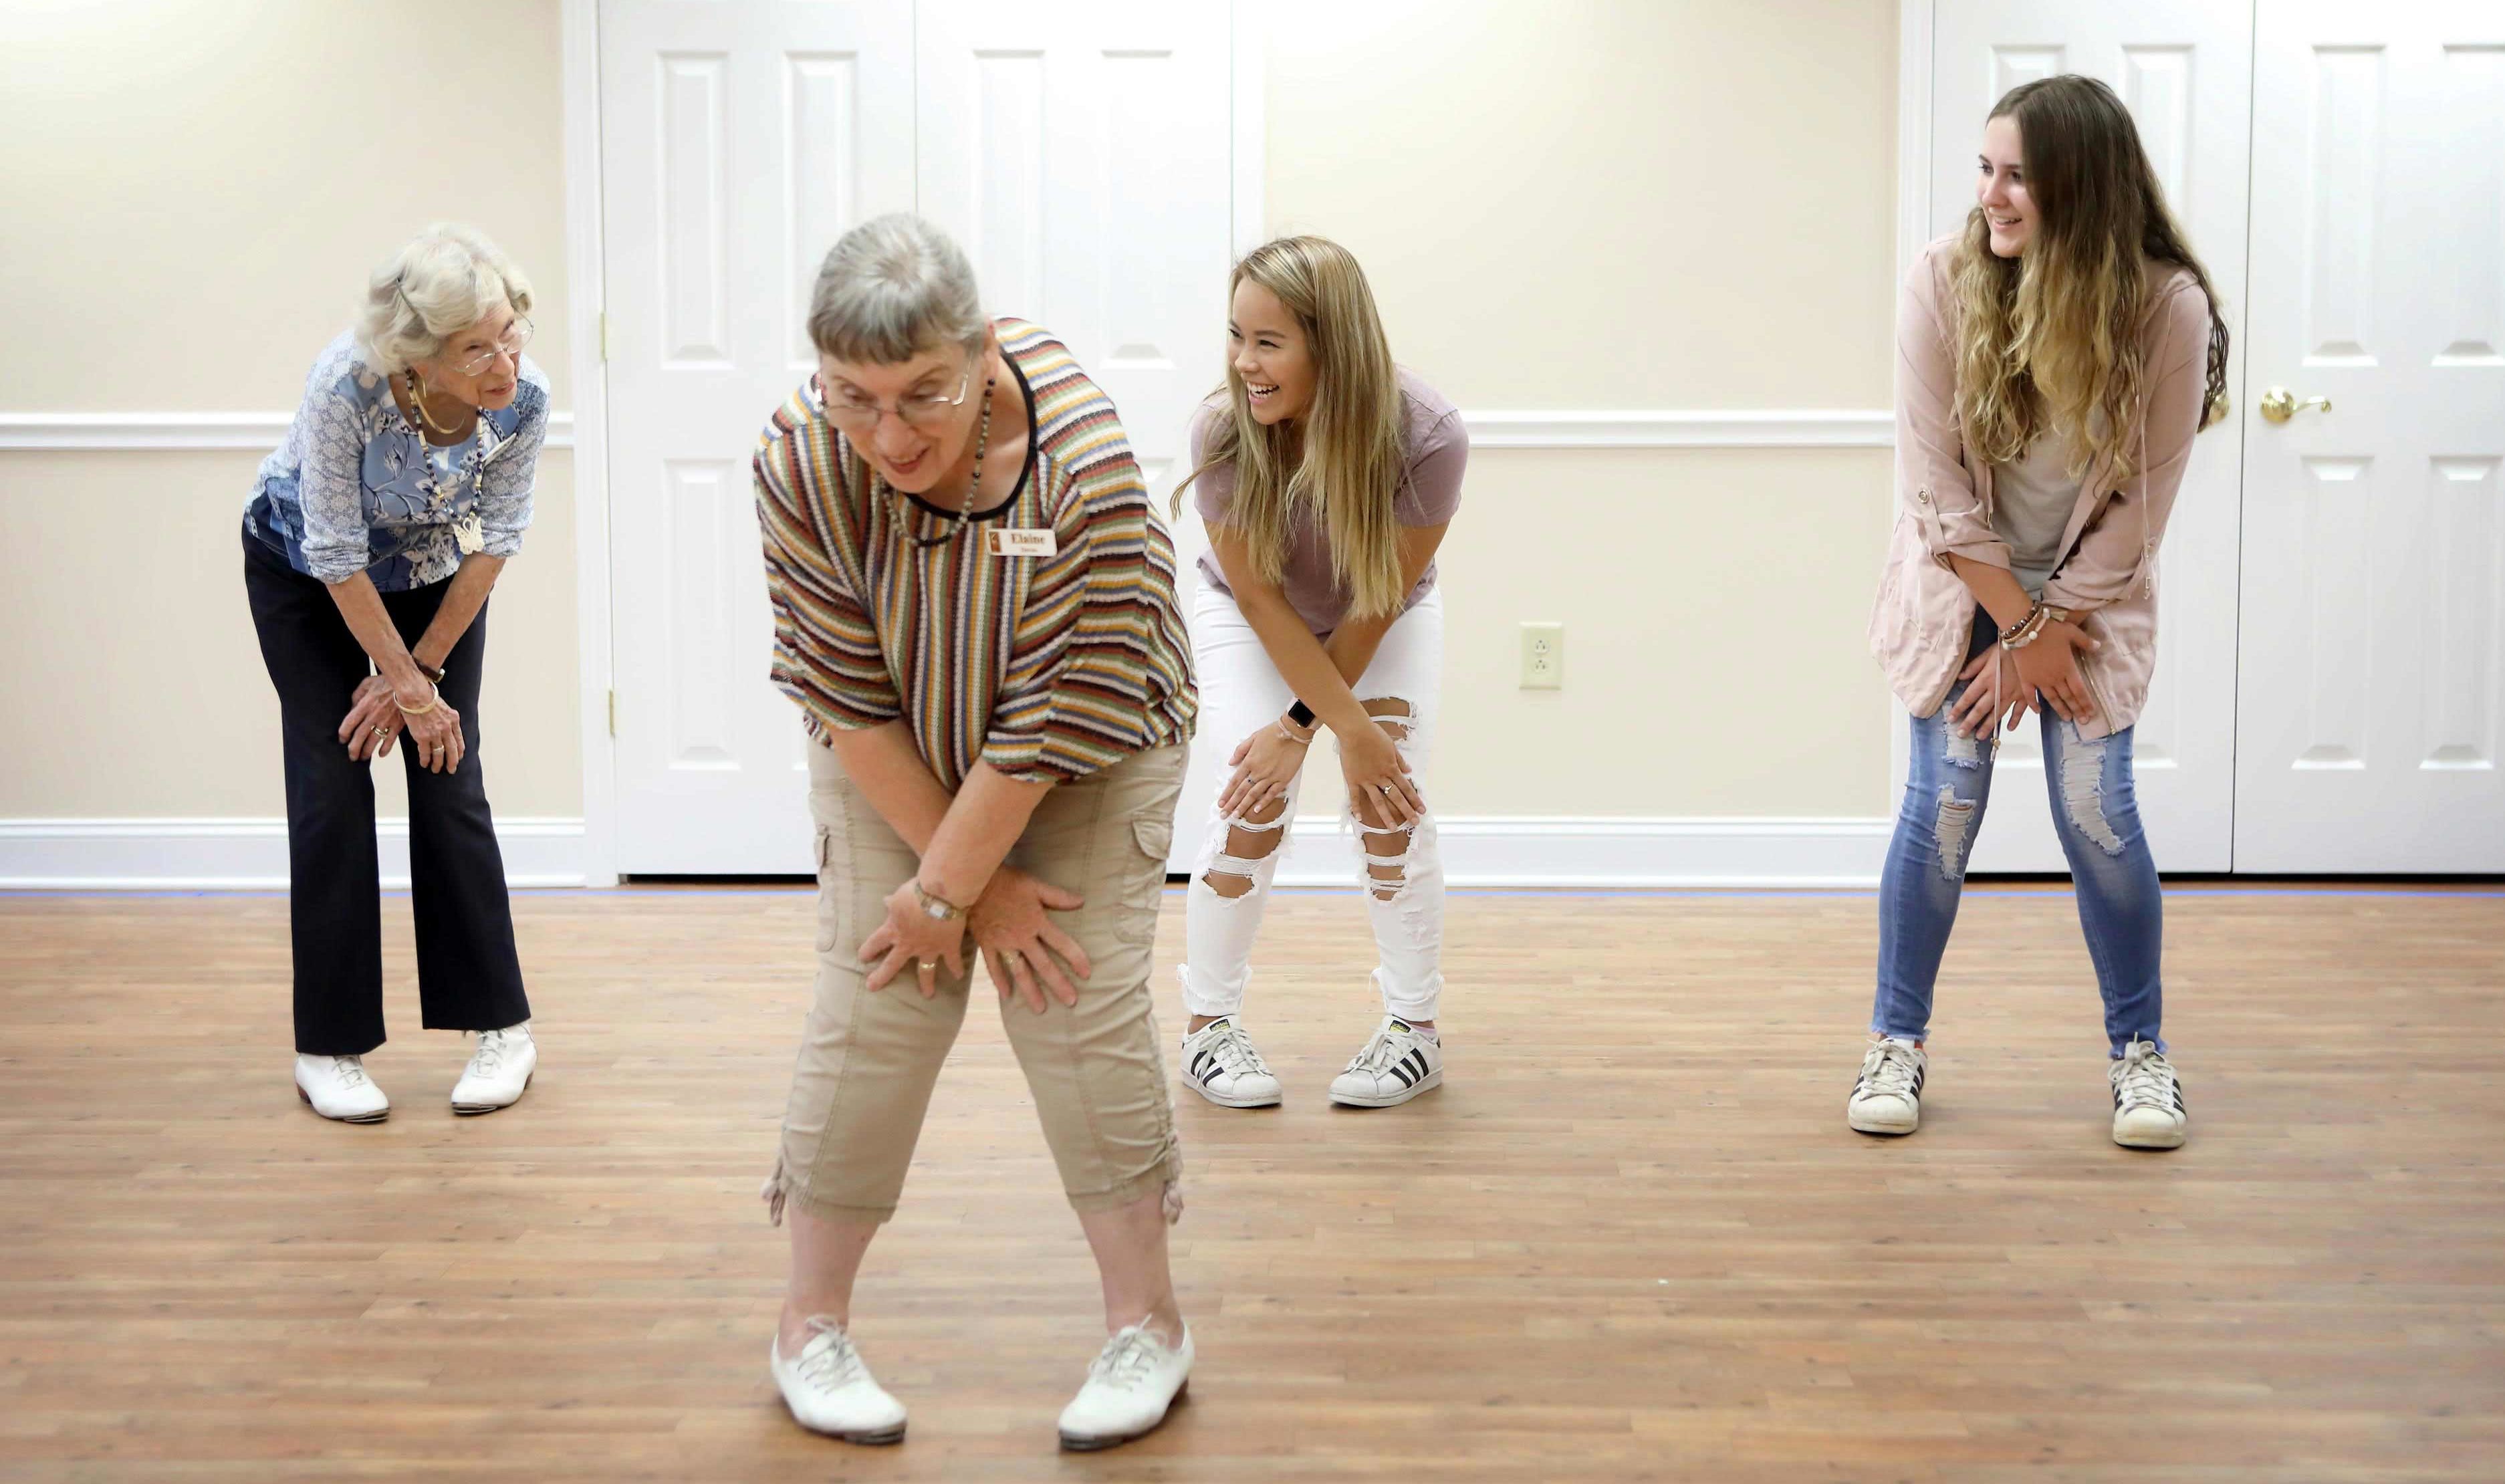 Mercer students Ava Nguyen, middle, and Elise Colquitt, right, take a clogging class with residents at Carlyle Place. The students are the first from Mercer to live on the Carlyle Place campus as part of a new program.